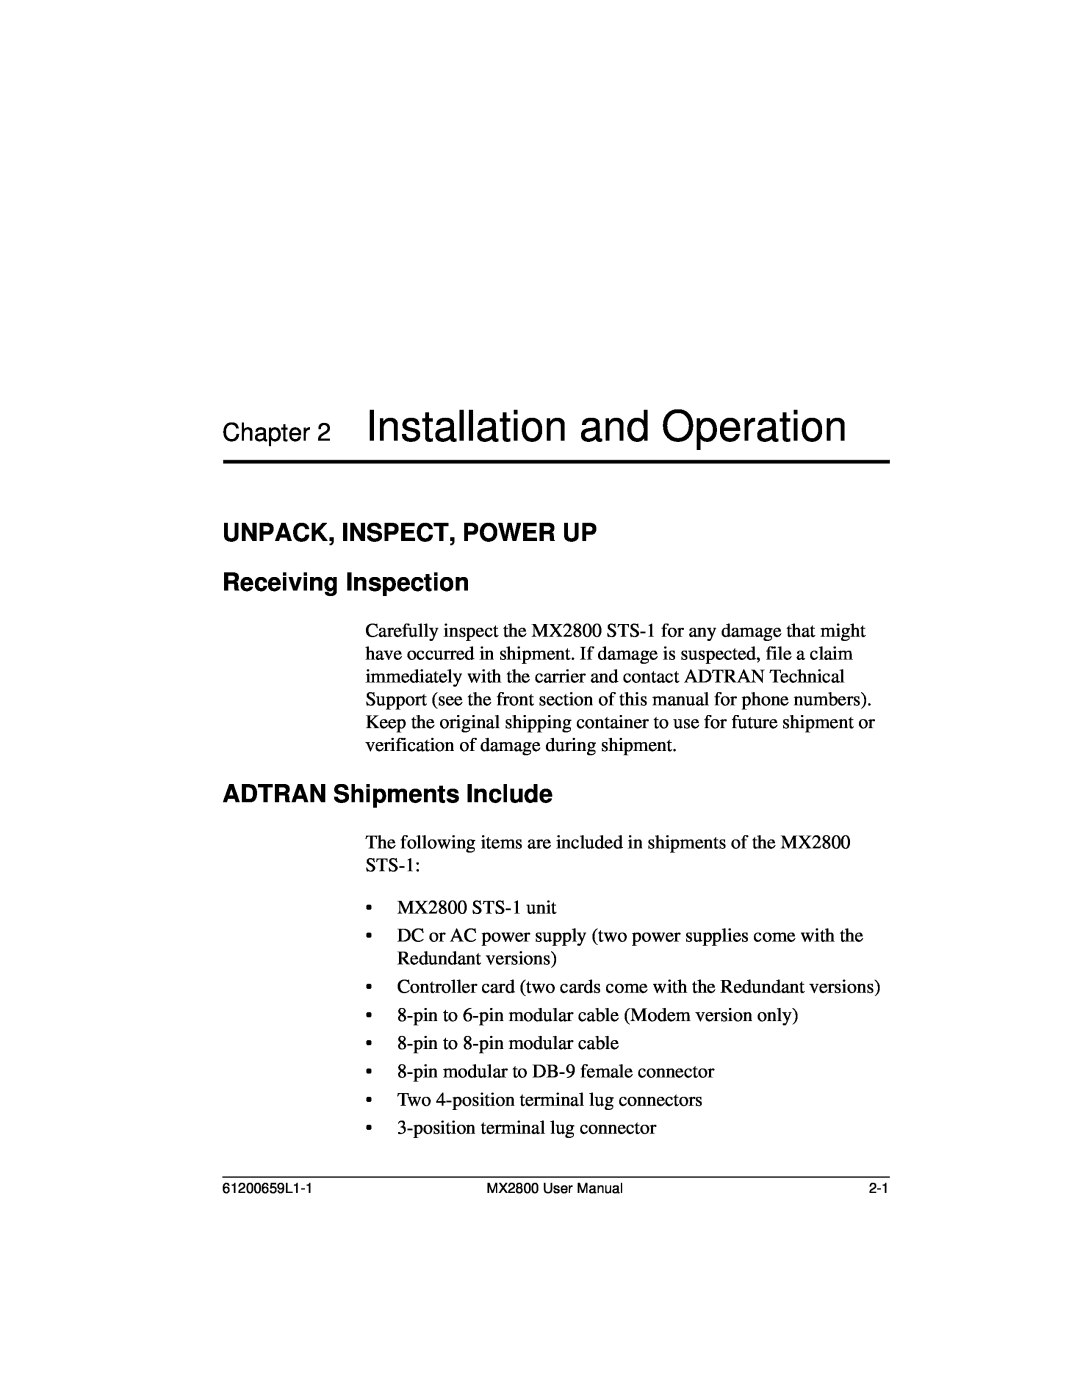 ADTRAN 4200659L6 Installation and Operation, UNPACK, INSPECT, POWER UP Receiving Inspection, ADTRAN Shipments Include 